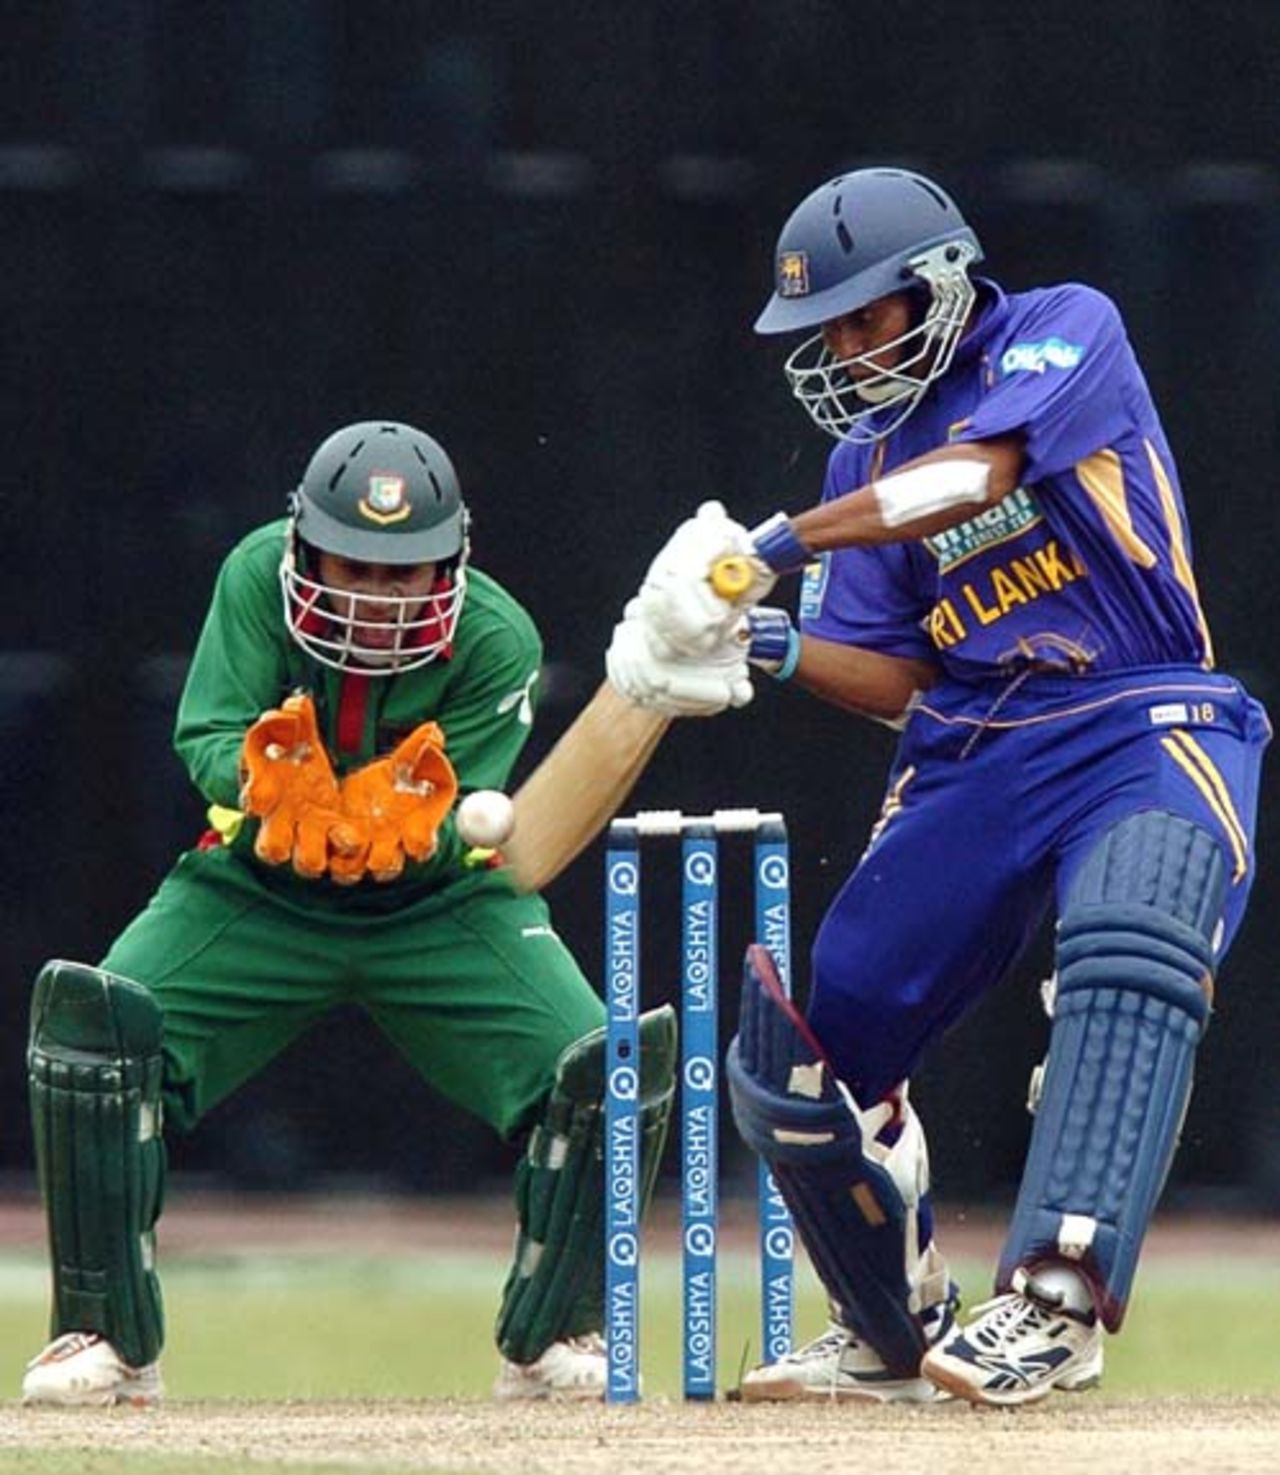 Tillakaratne Dilshan  is watched by  Mushfiqur Rahim as he nudges the ball to the off side, Sri Lanka v Bangladesh, 2nd ODI, Colombo, July 23, 2007